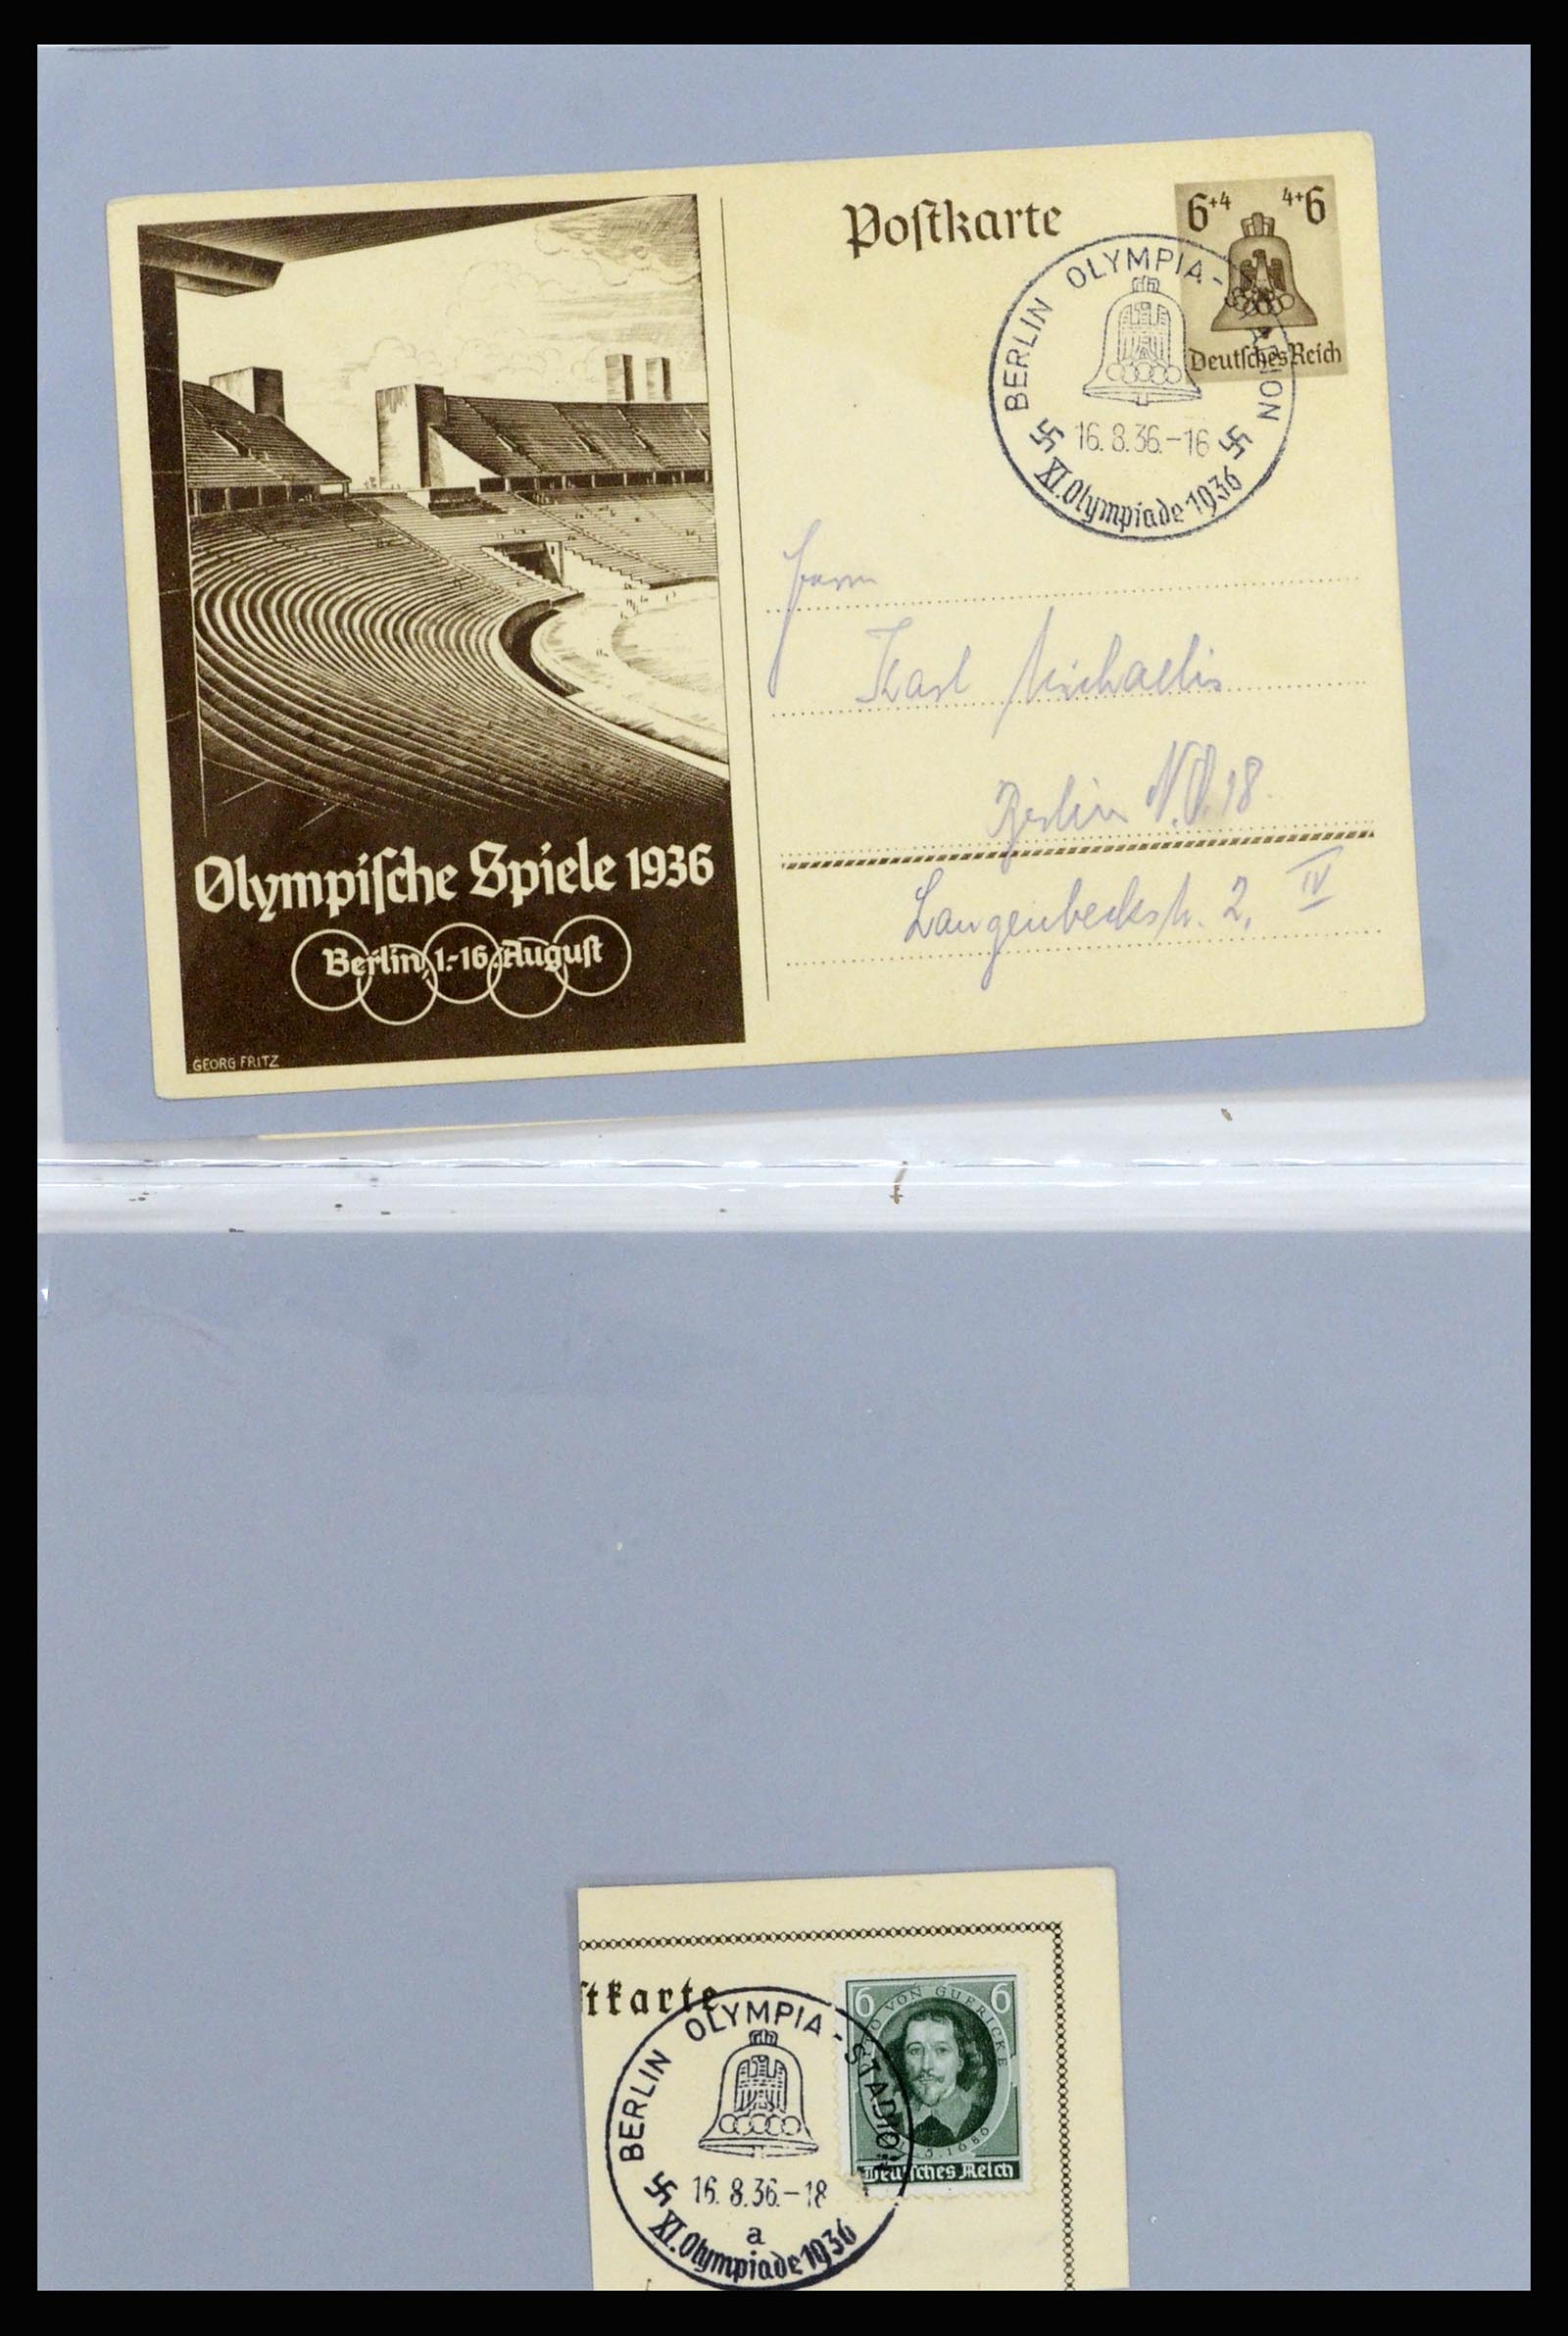 37118 051 - Stamp collection 37118 Olympics 1936.